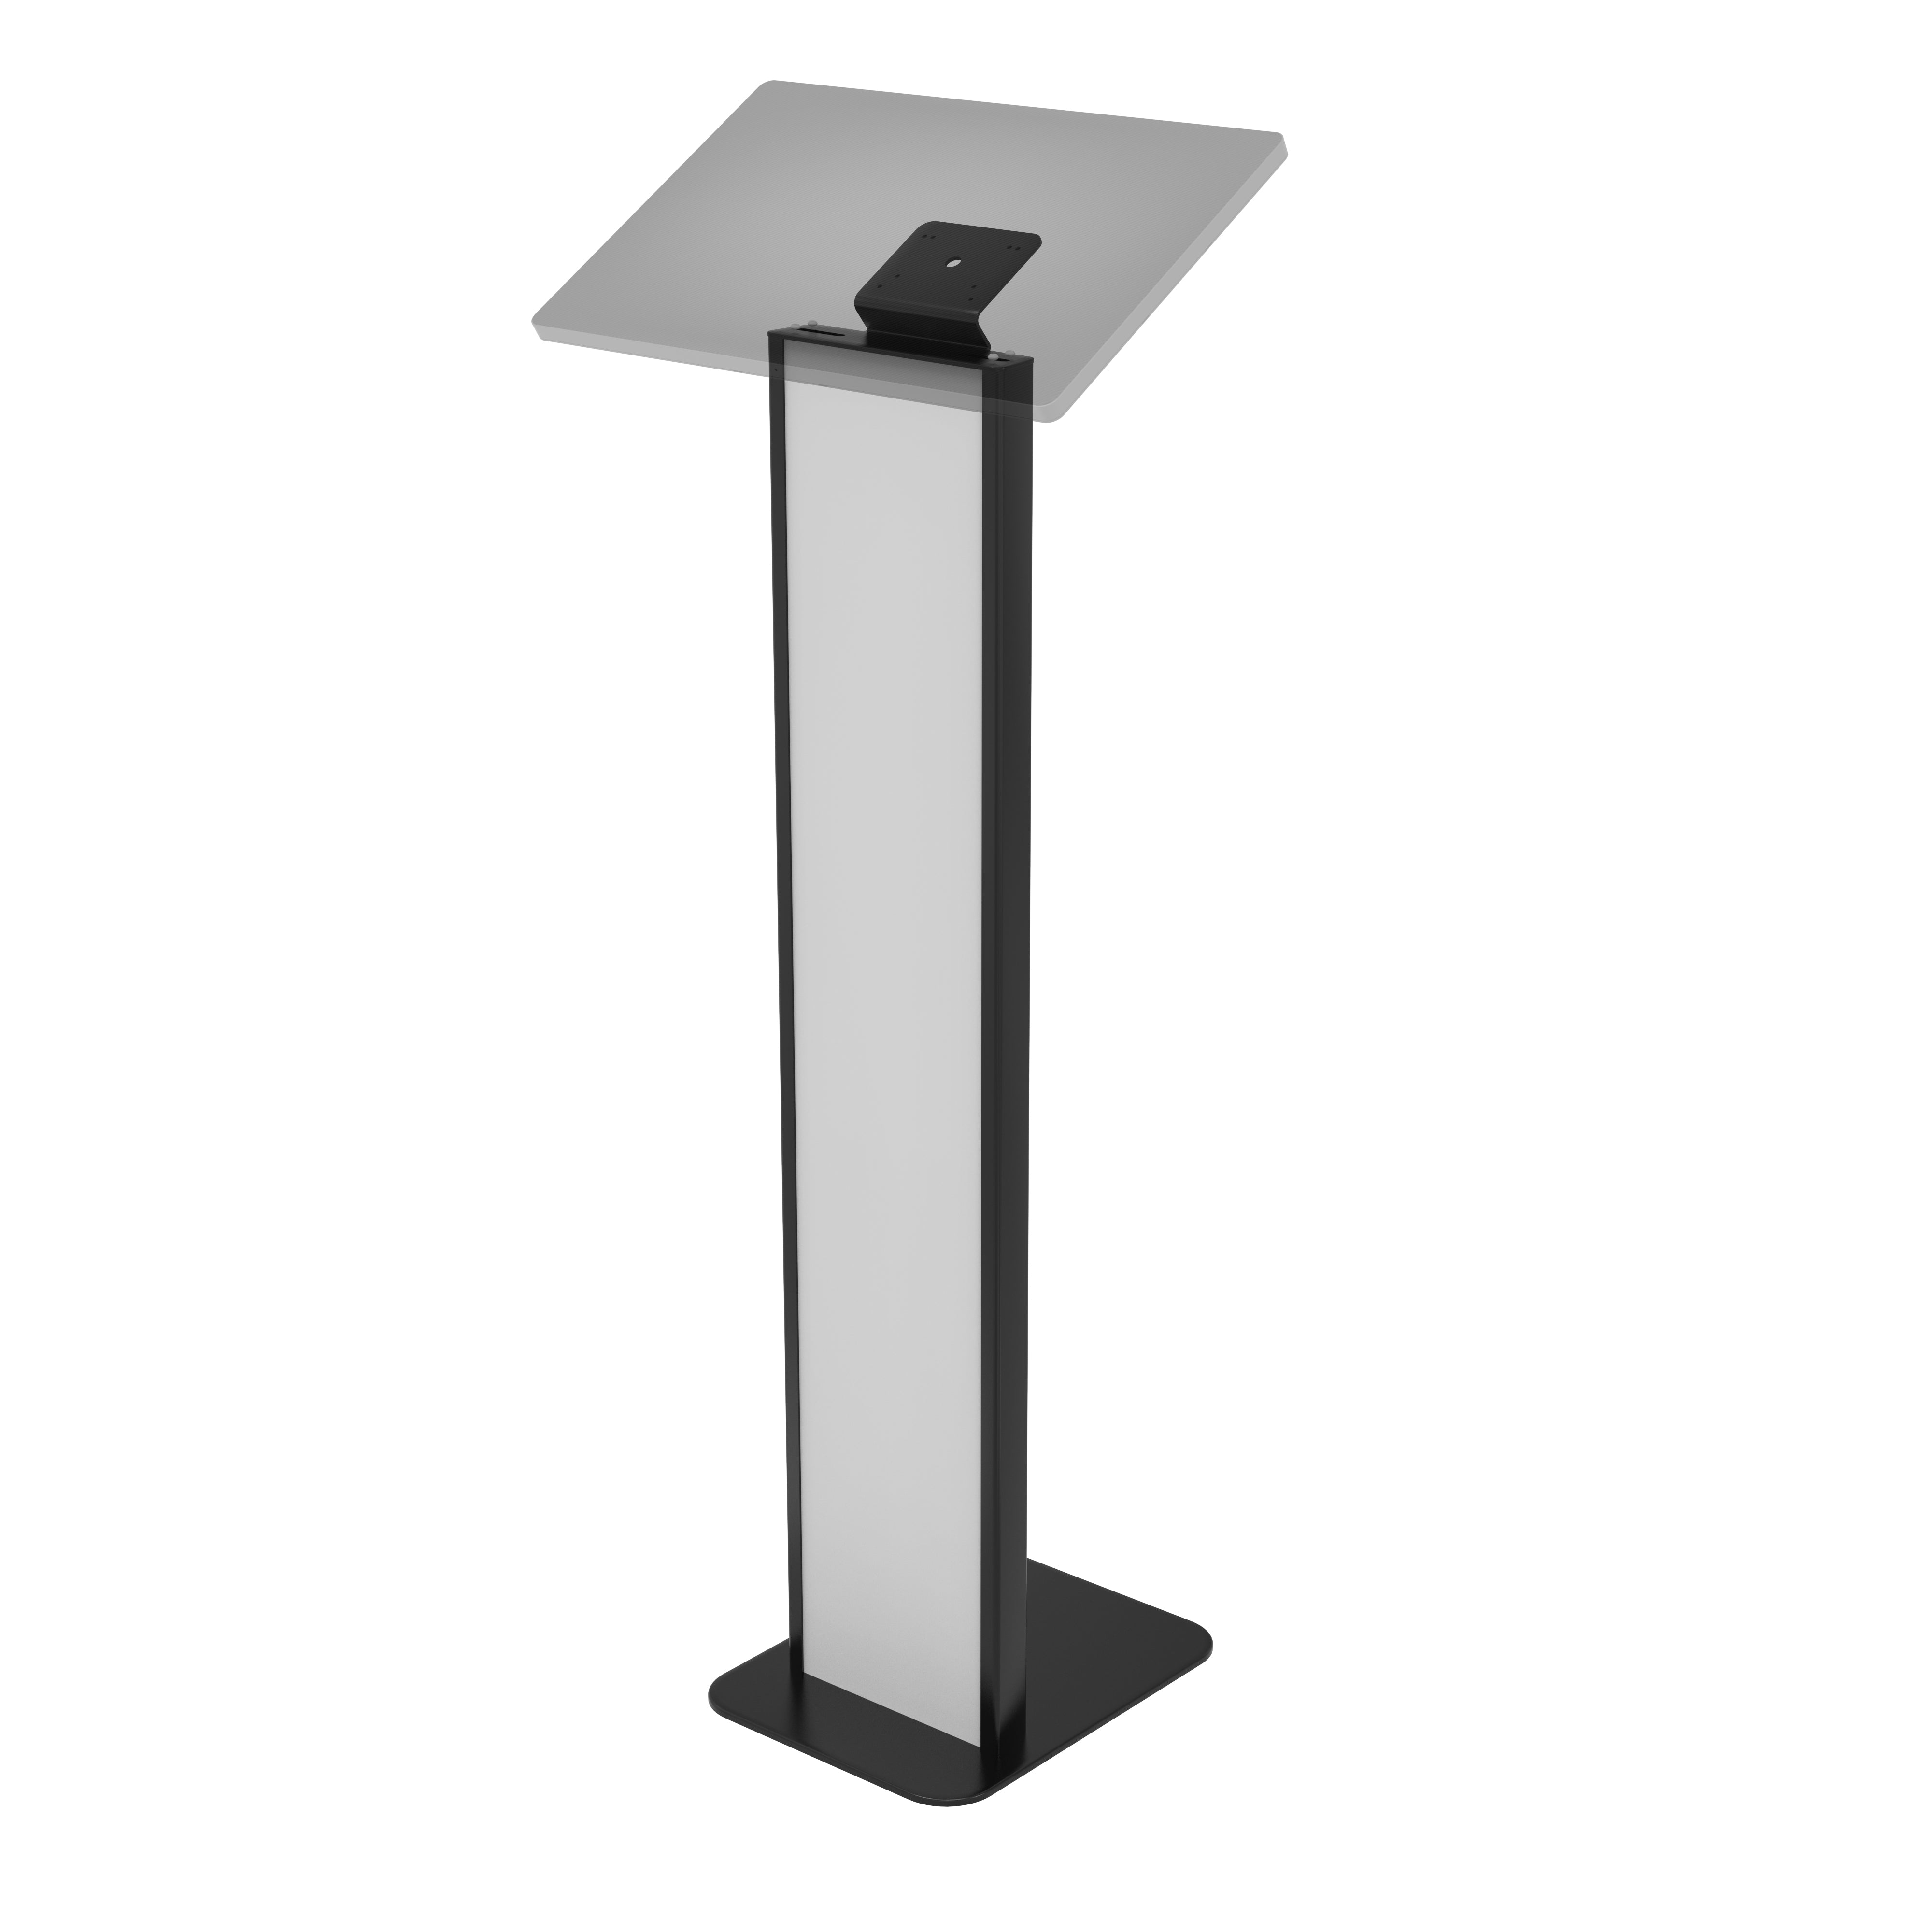 Premium Floor Stand Kiosk with Graphic Slots and VESA Plate for Kitting (Black)